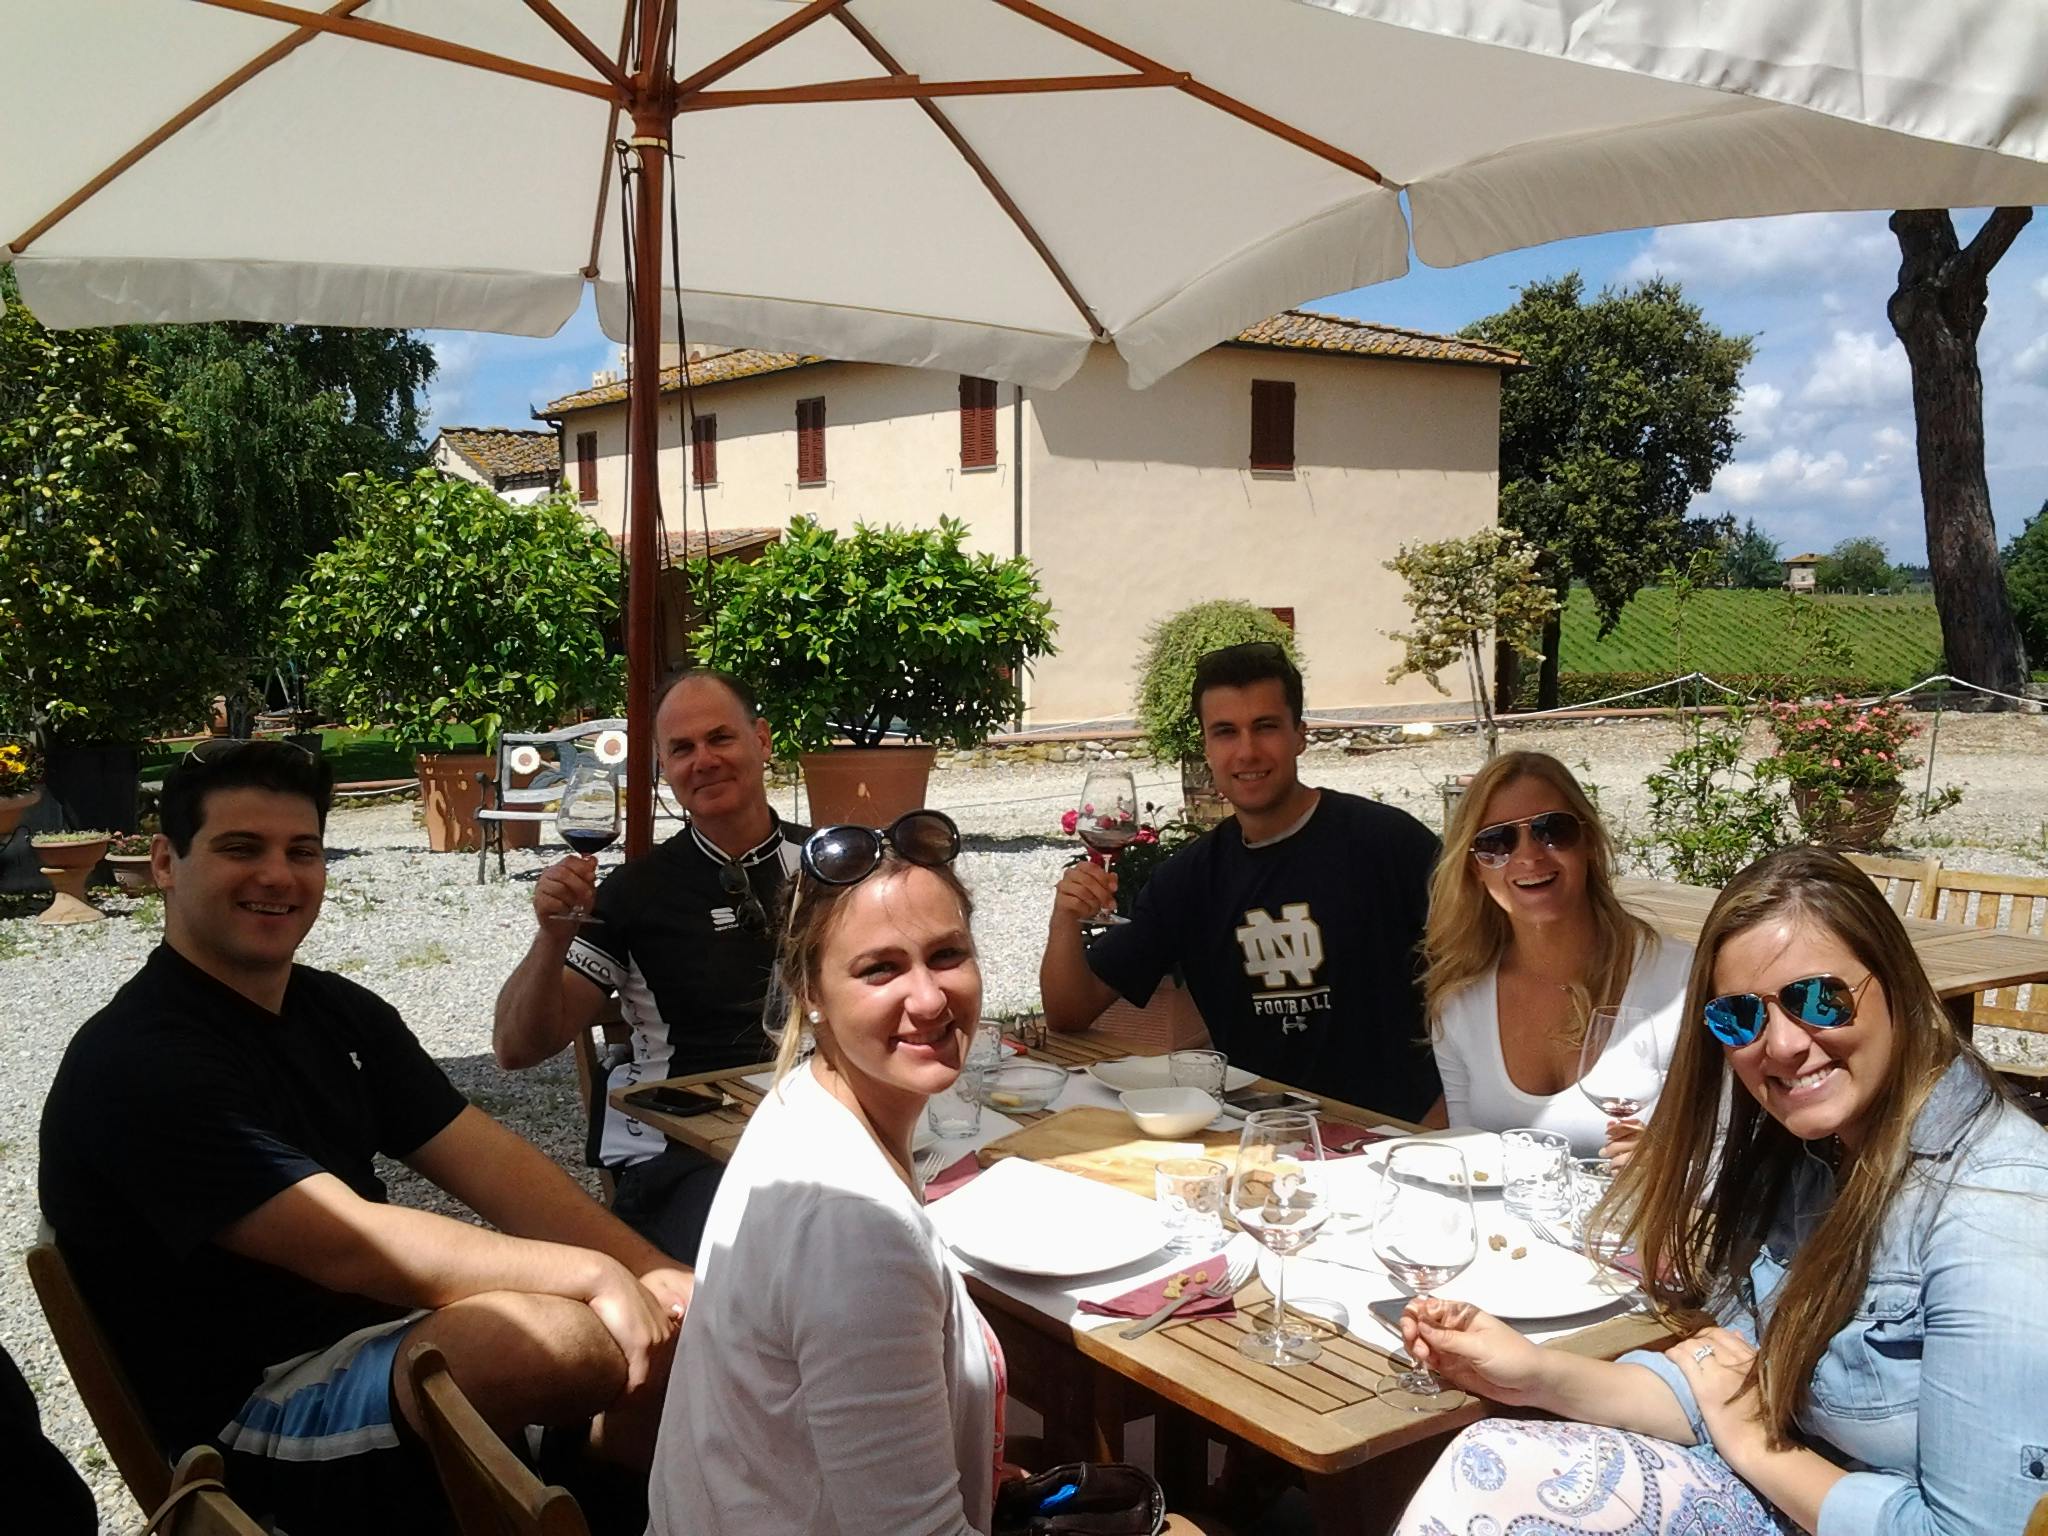 Chianti winery tour with 4 wines, cheese and bruschettas tasting